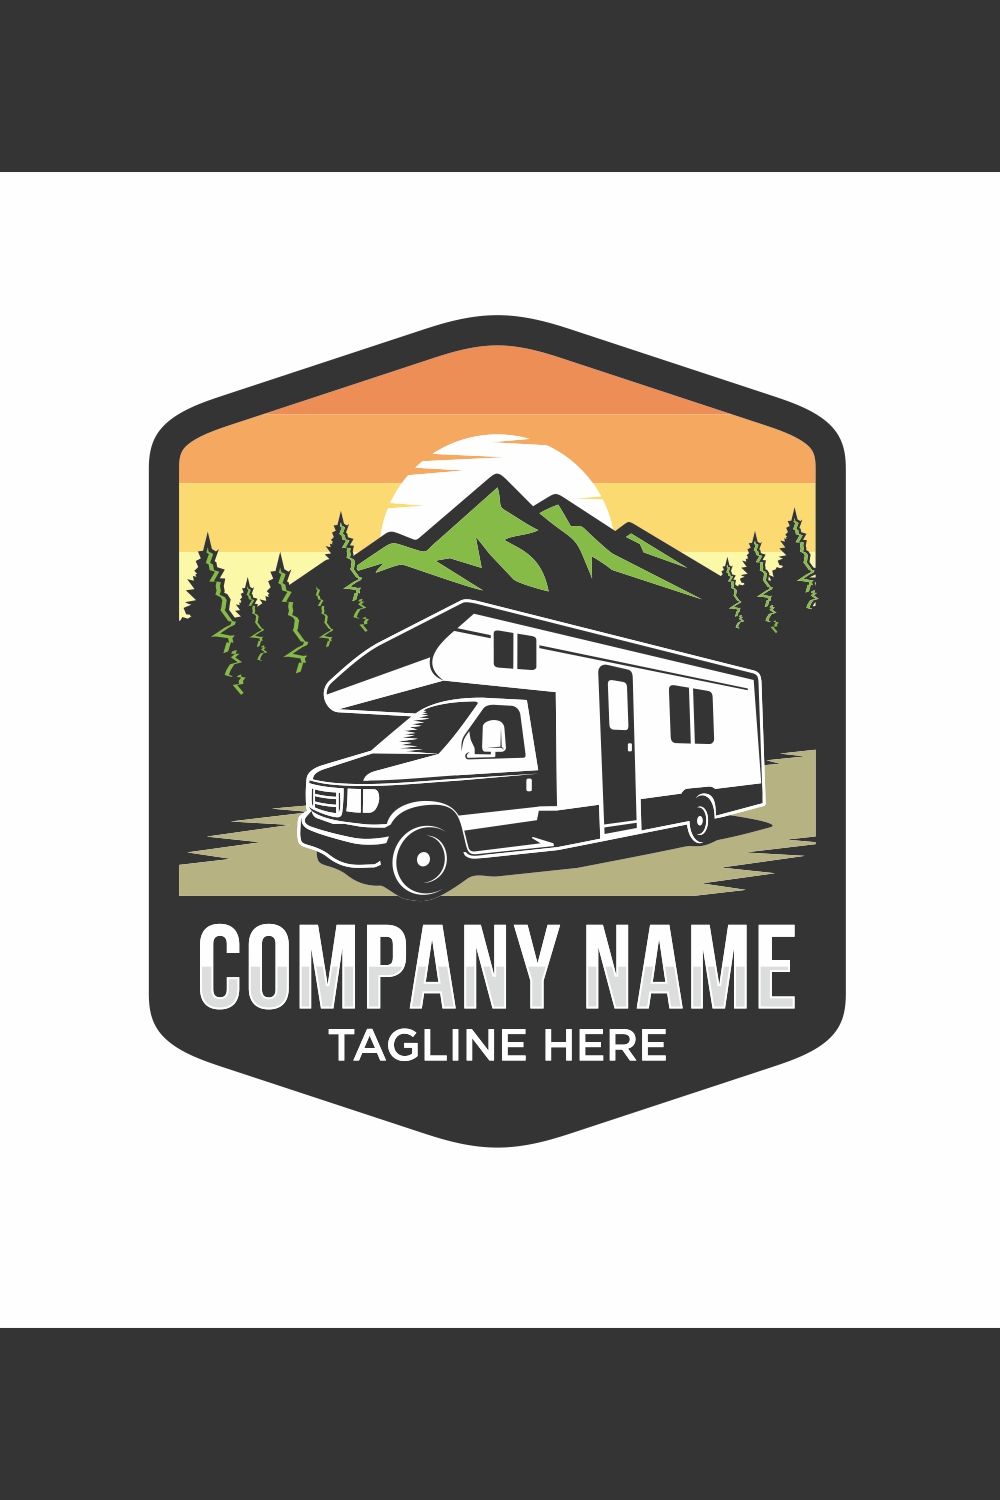 Camper Van Or Recreational Vehicle (RV) Adventure Car Logo Template, Travel And Leisure Vector Design – Only 10$ pinterest preview image.